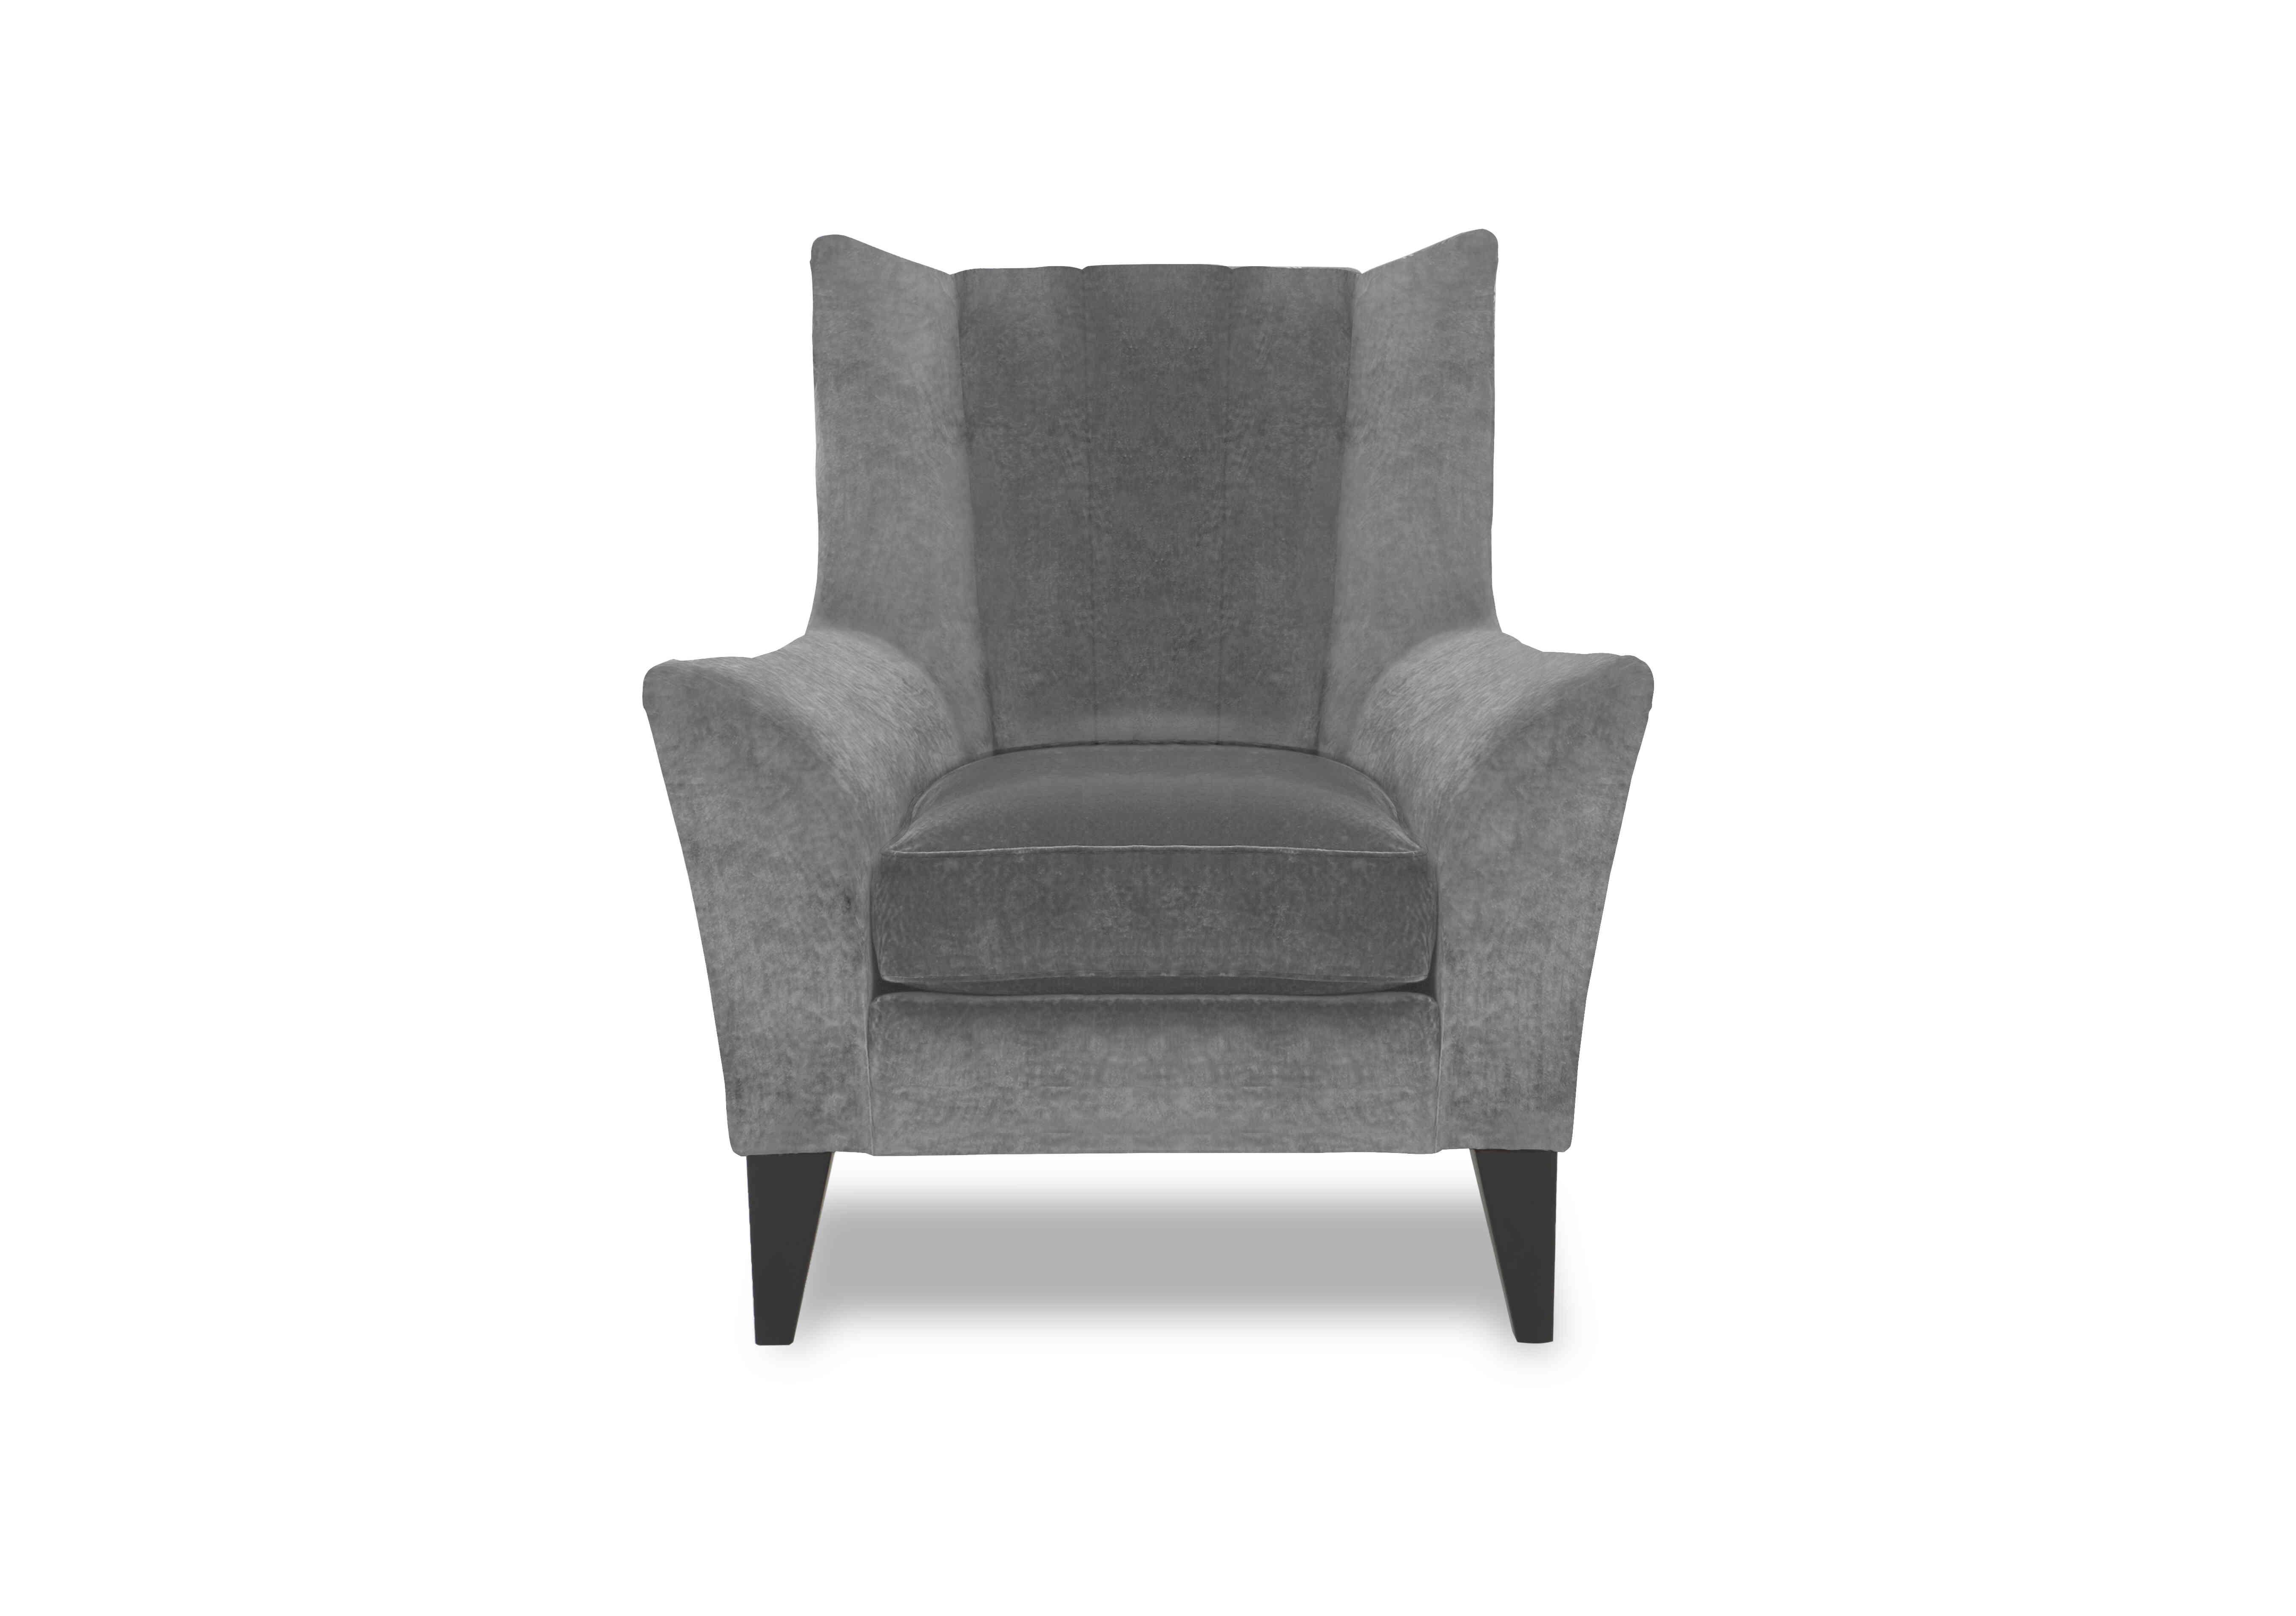 Modern Classics Fluted Chair in Remini Smoke Sp Mf on Furniture Village